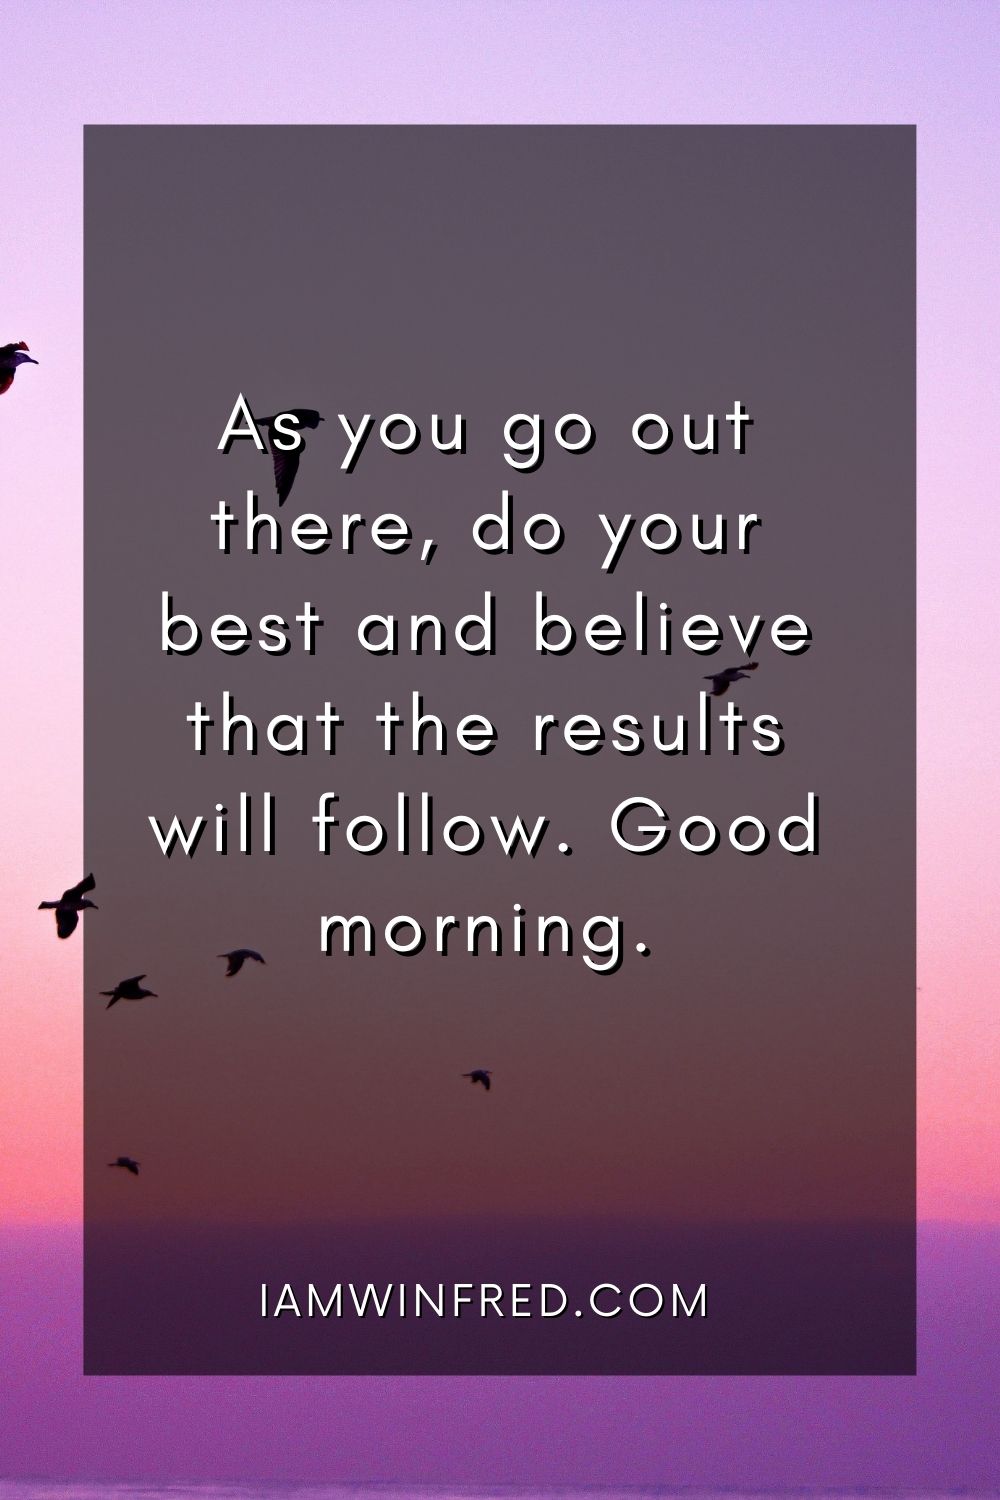 As You Go Out There Do Your Best And Believe That The Results Will Follow. Good Morning.